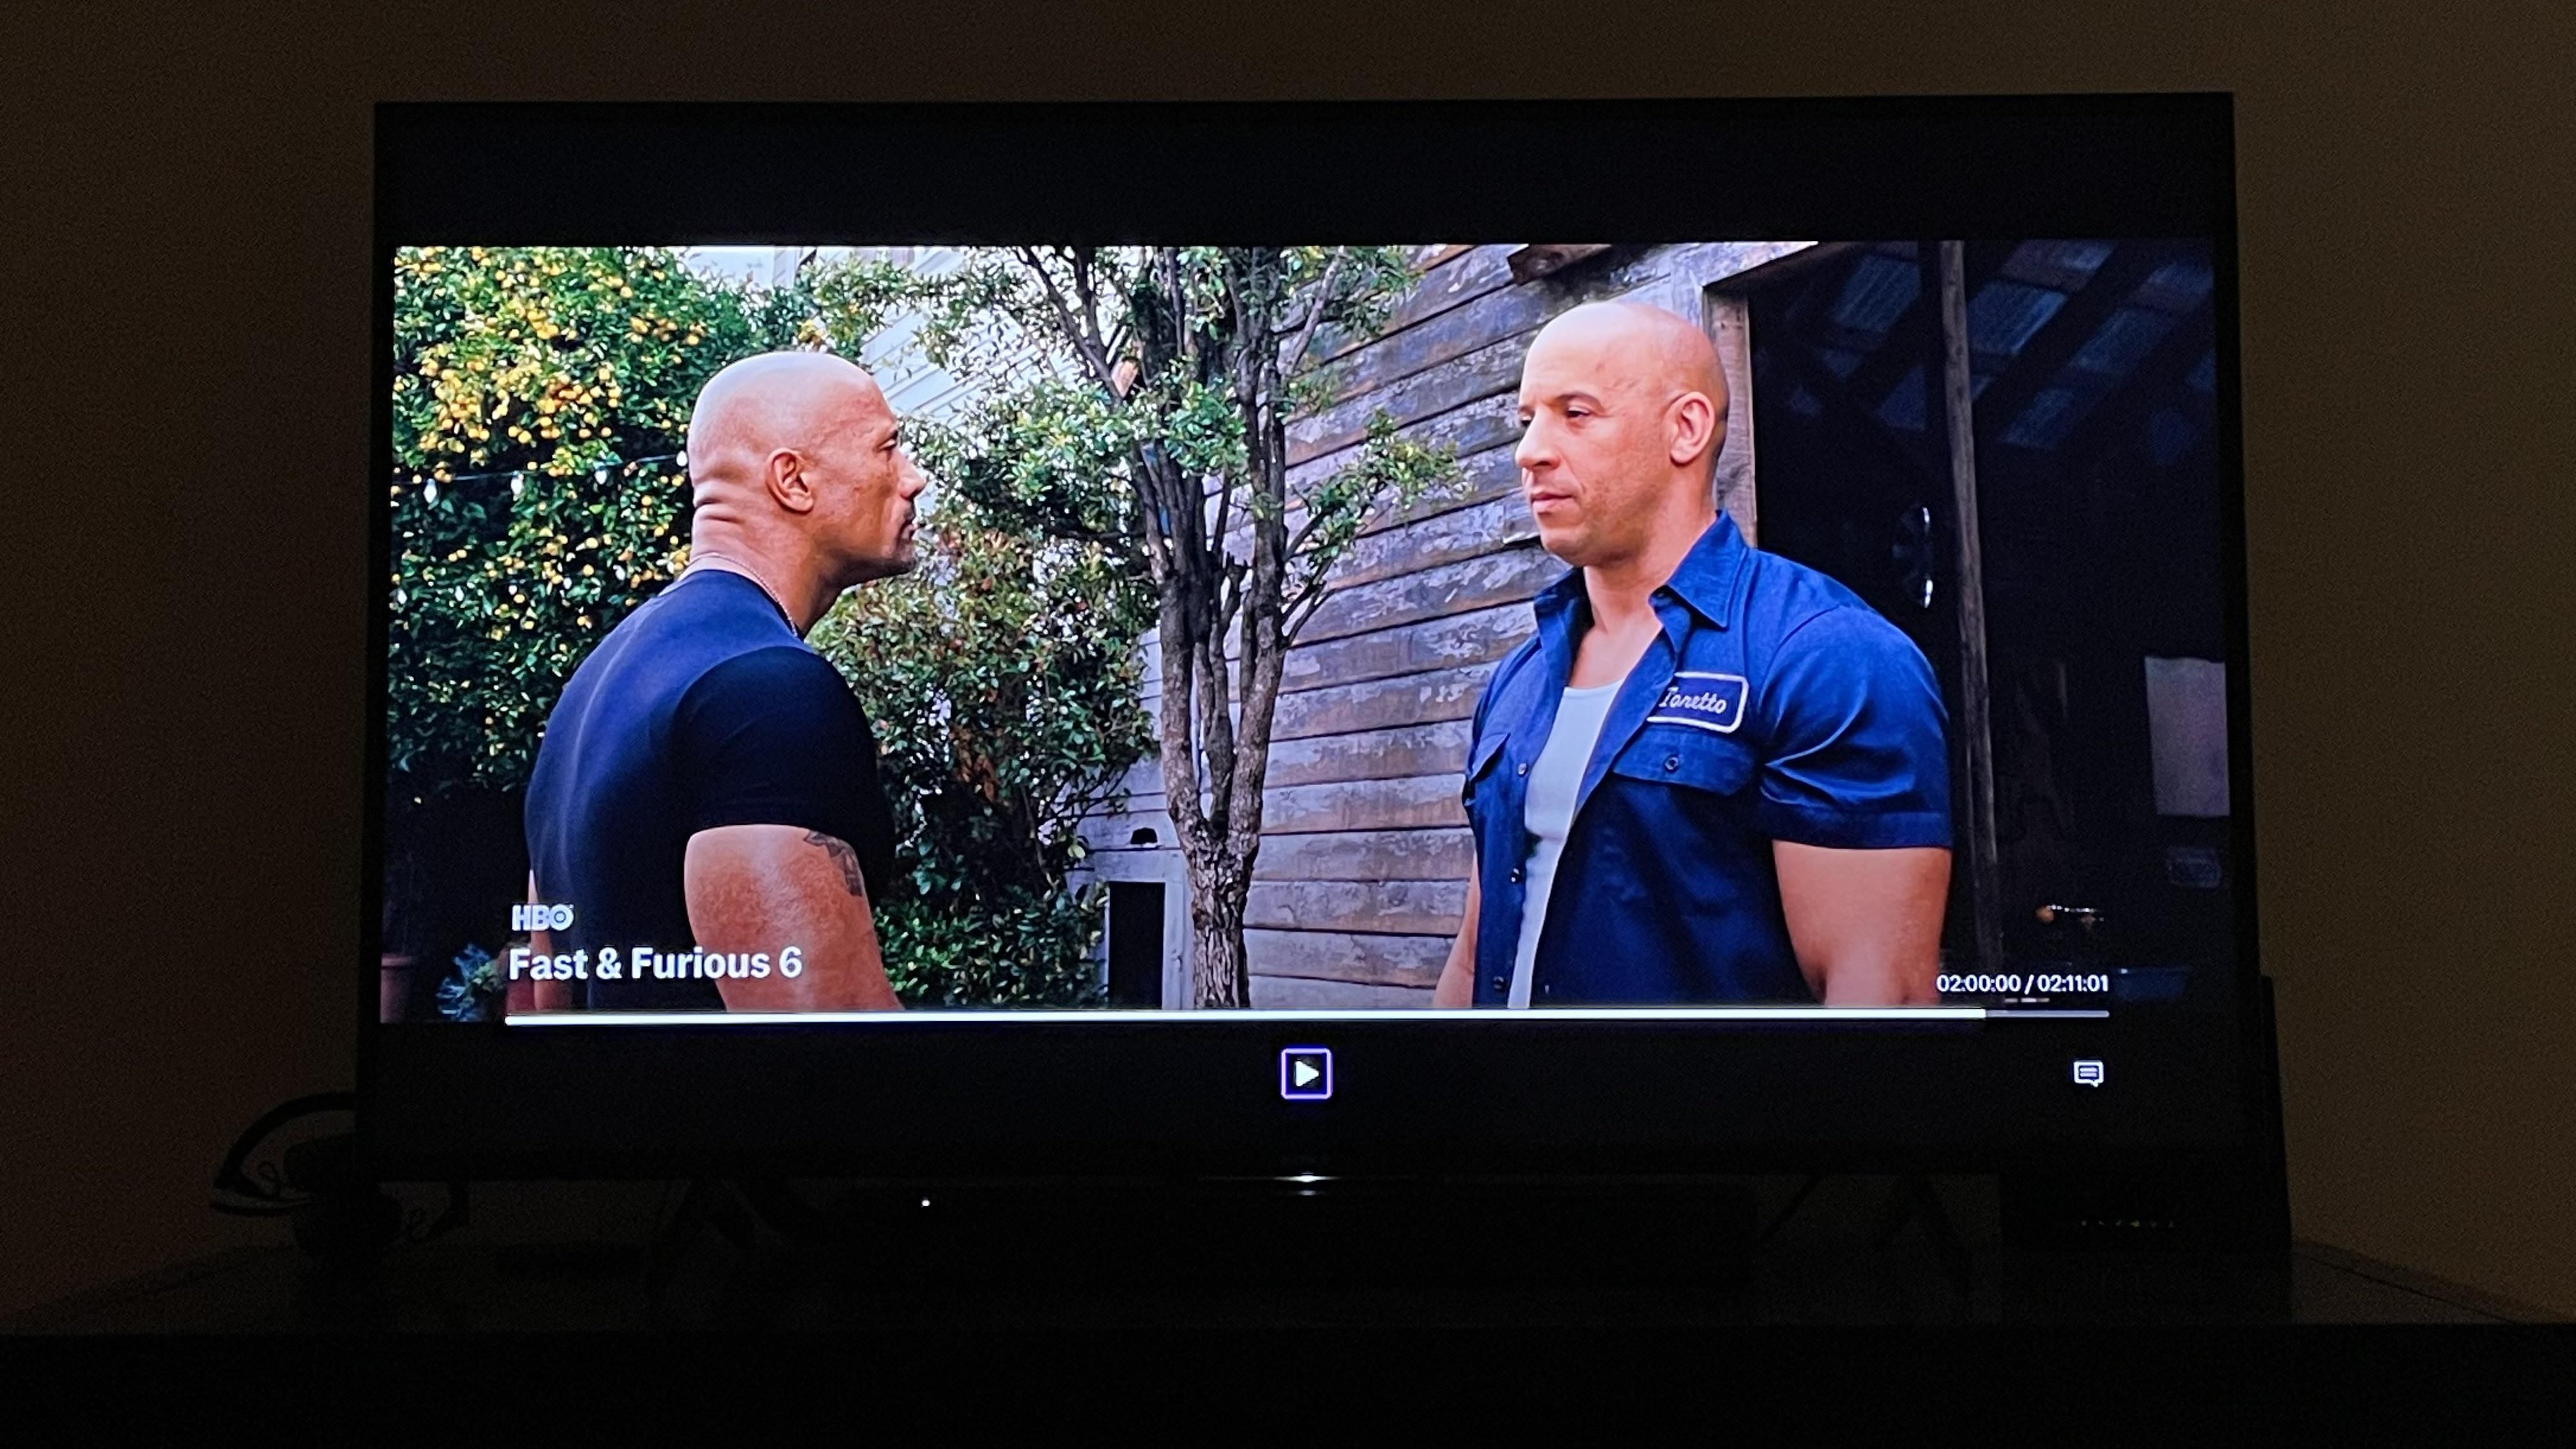 Is it just me or does The Rock look like he’s standing several feet further away from the camera than Vin Diesel